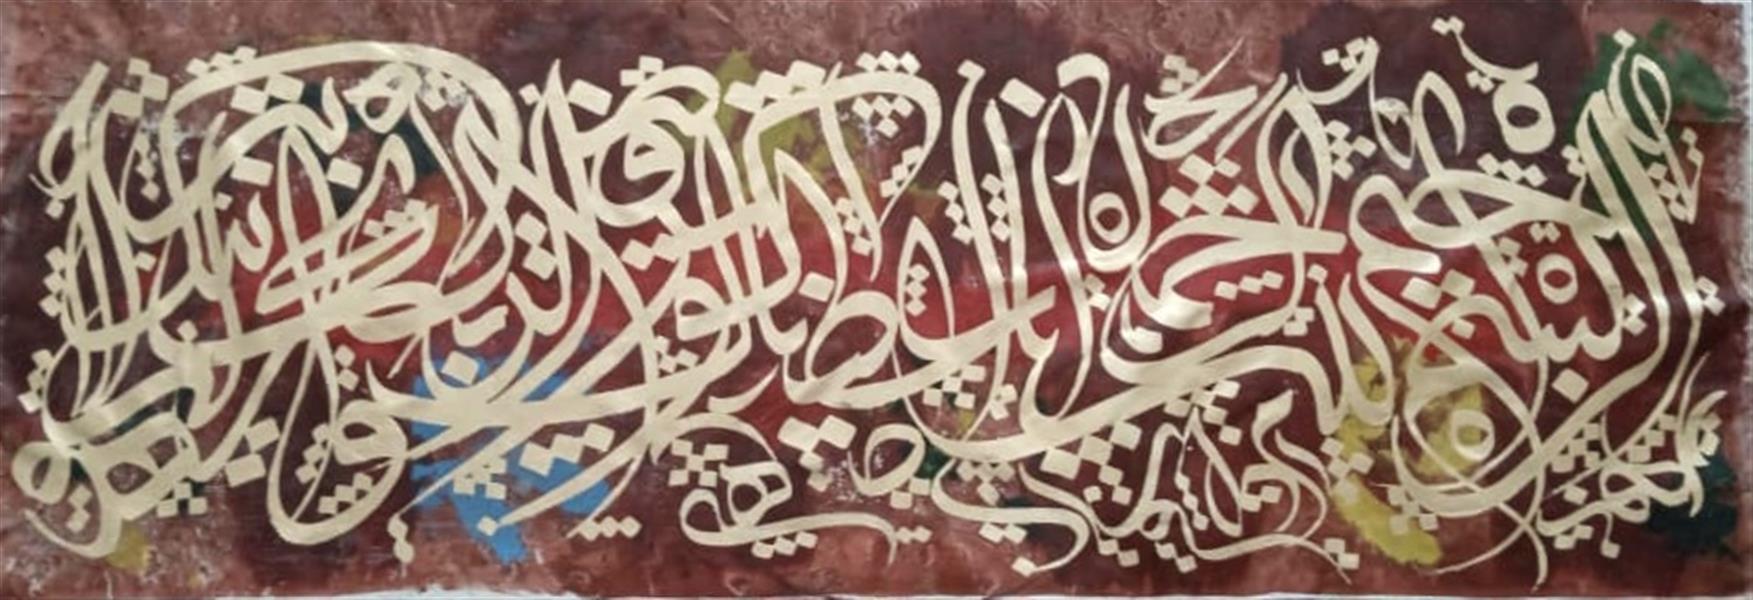 Painting Artwork by MohammadJavad Arabi  ,Abstract,Calligraphy,Patterns,Textile,Acrylic,Canvas,Abstract,Folk